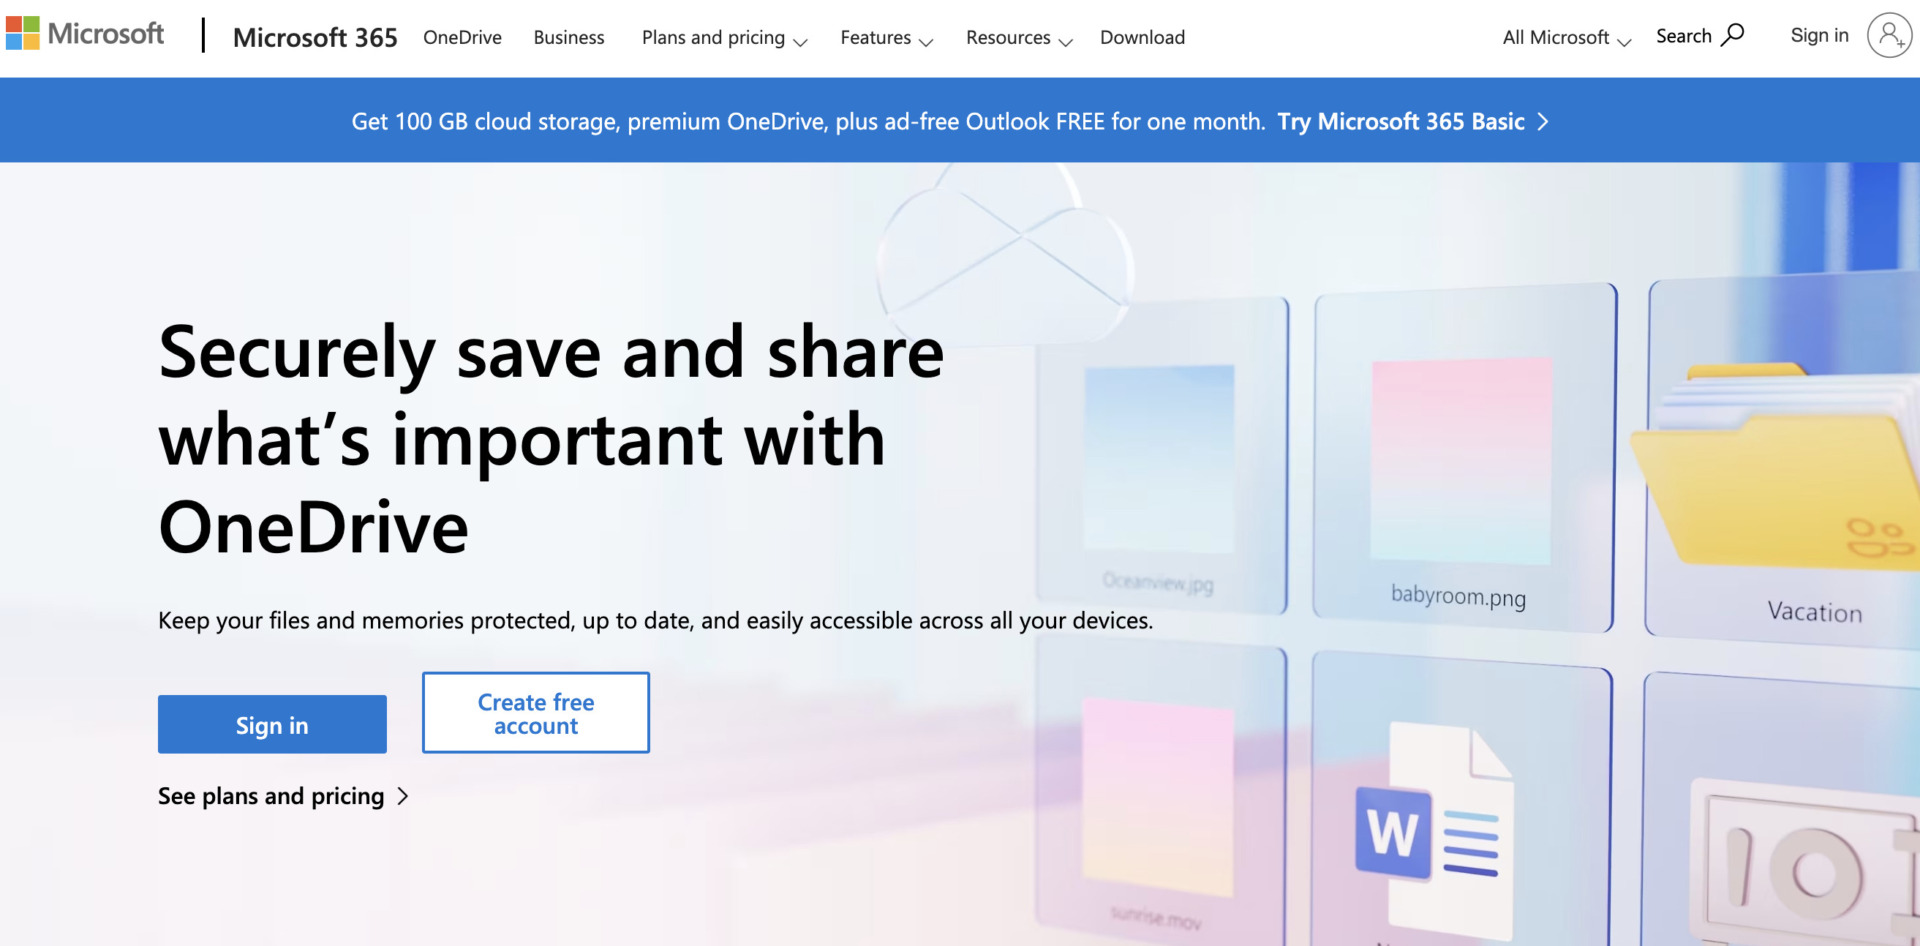 Top page of OneDrive